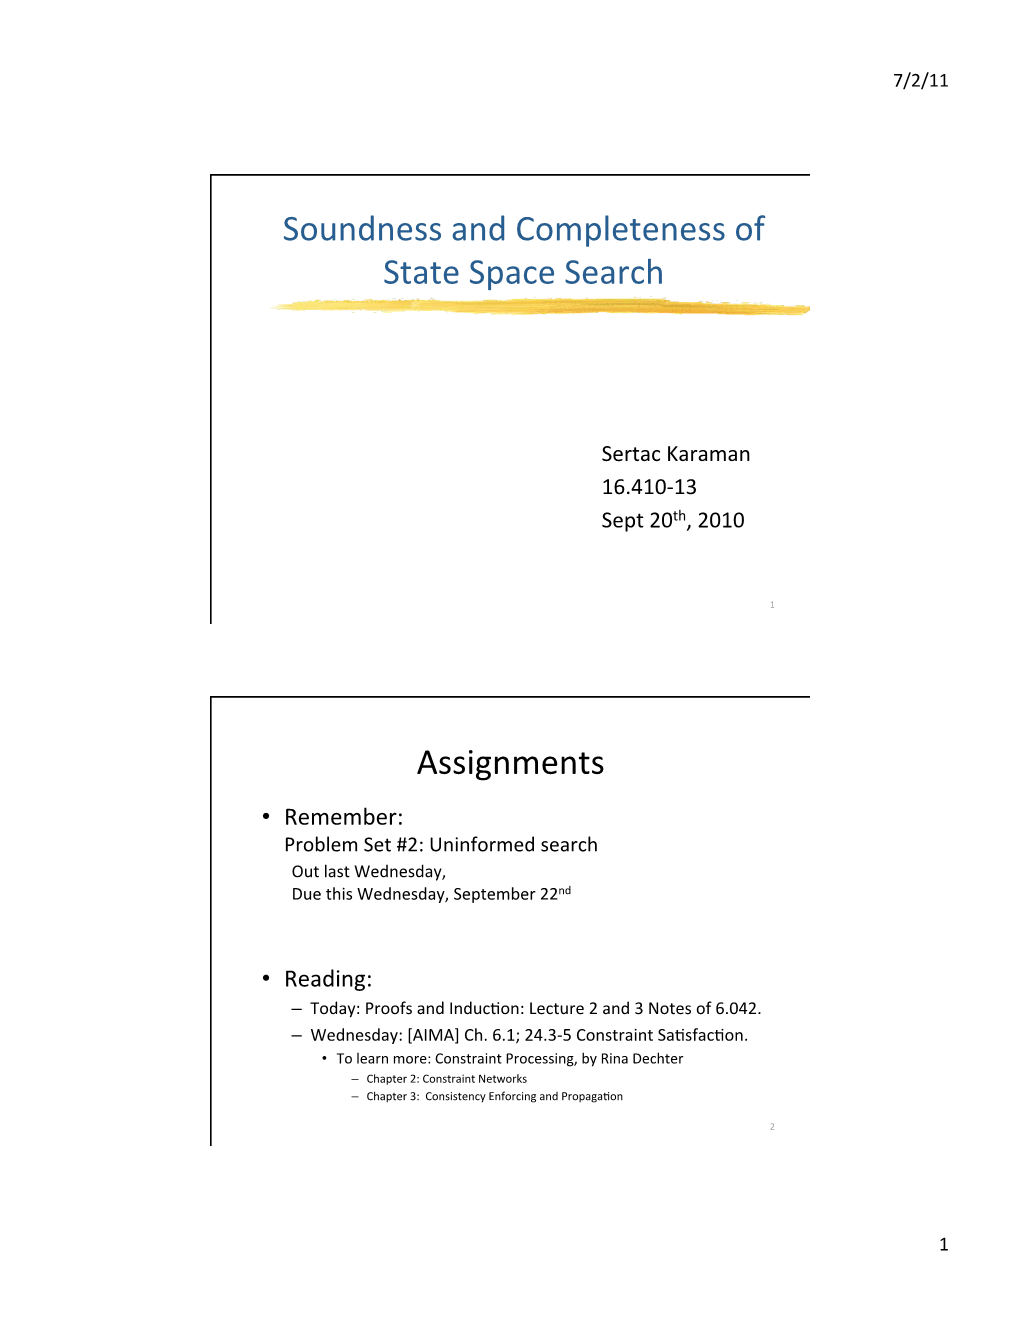 16.410 Lecture 04: Soundness and Completeness of State Space Search